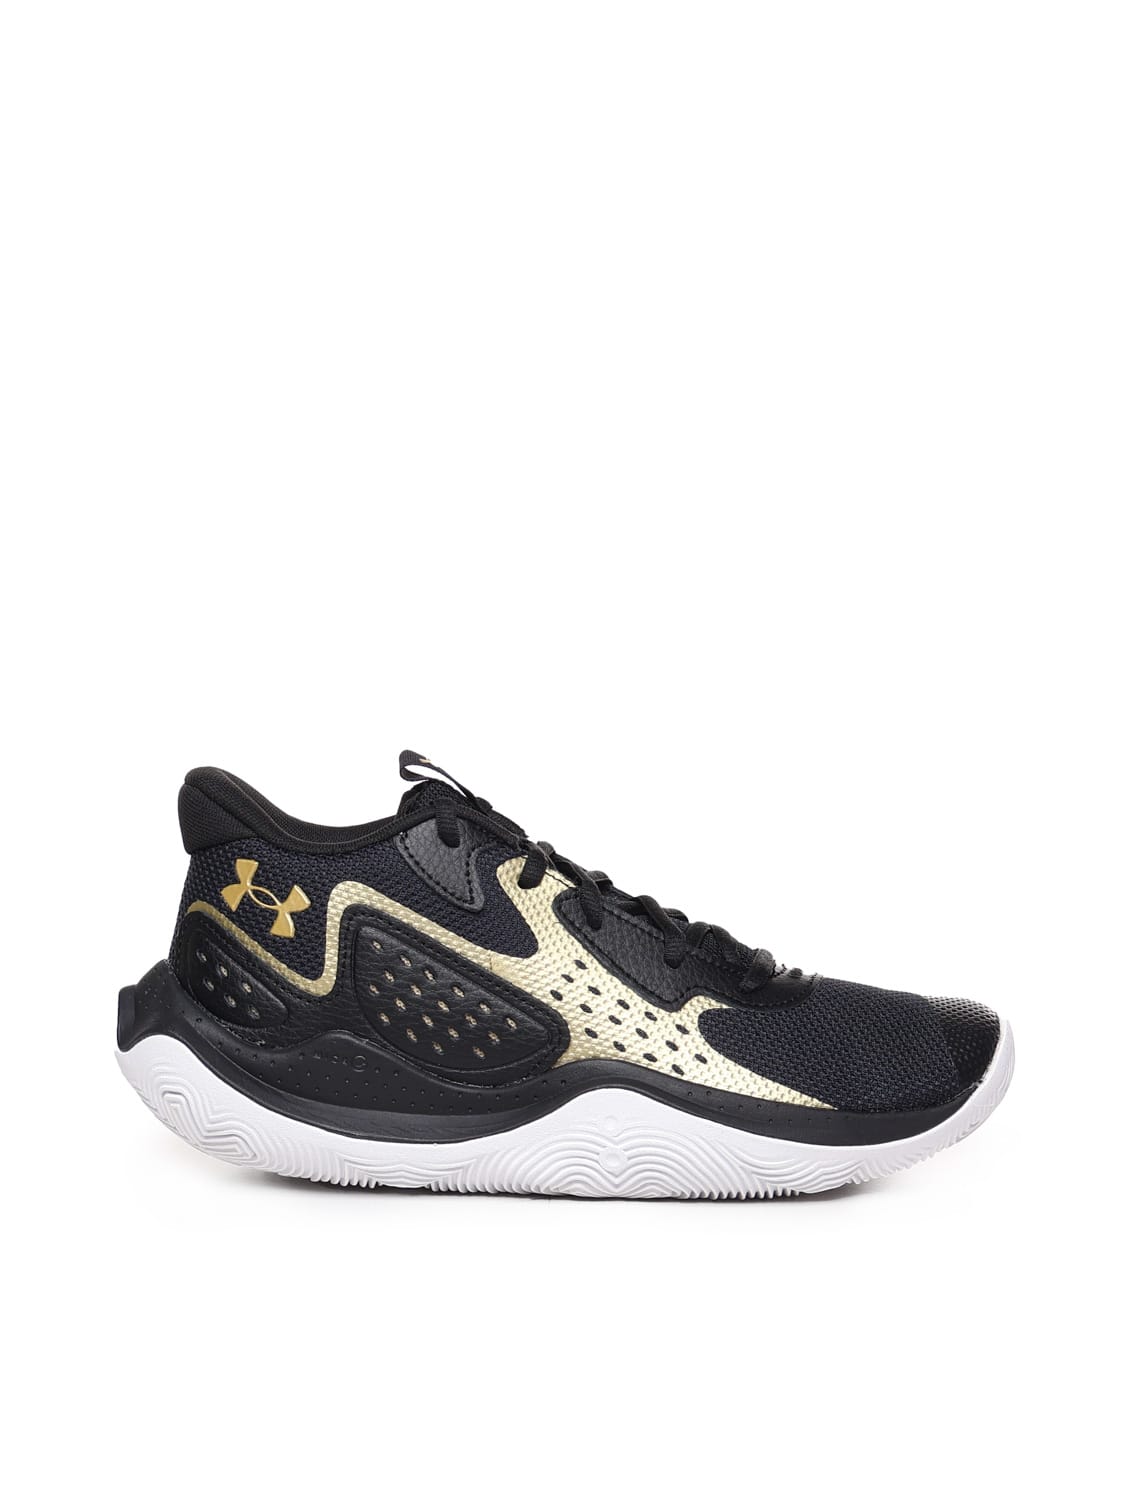 Under Armour Ua Jet 23 Basketball Shoes In Black